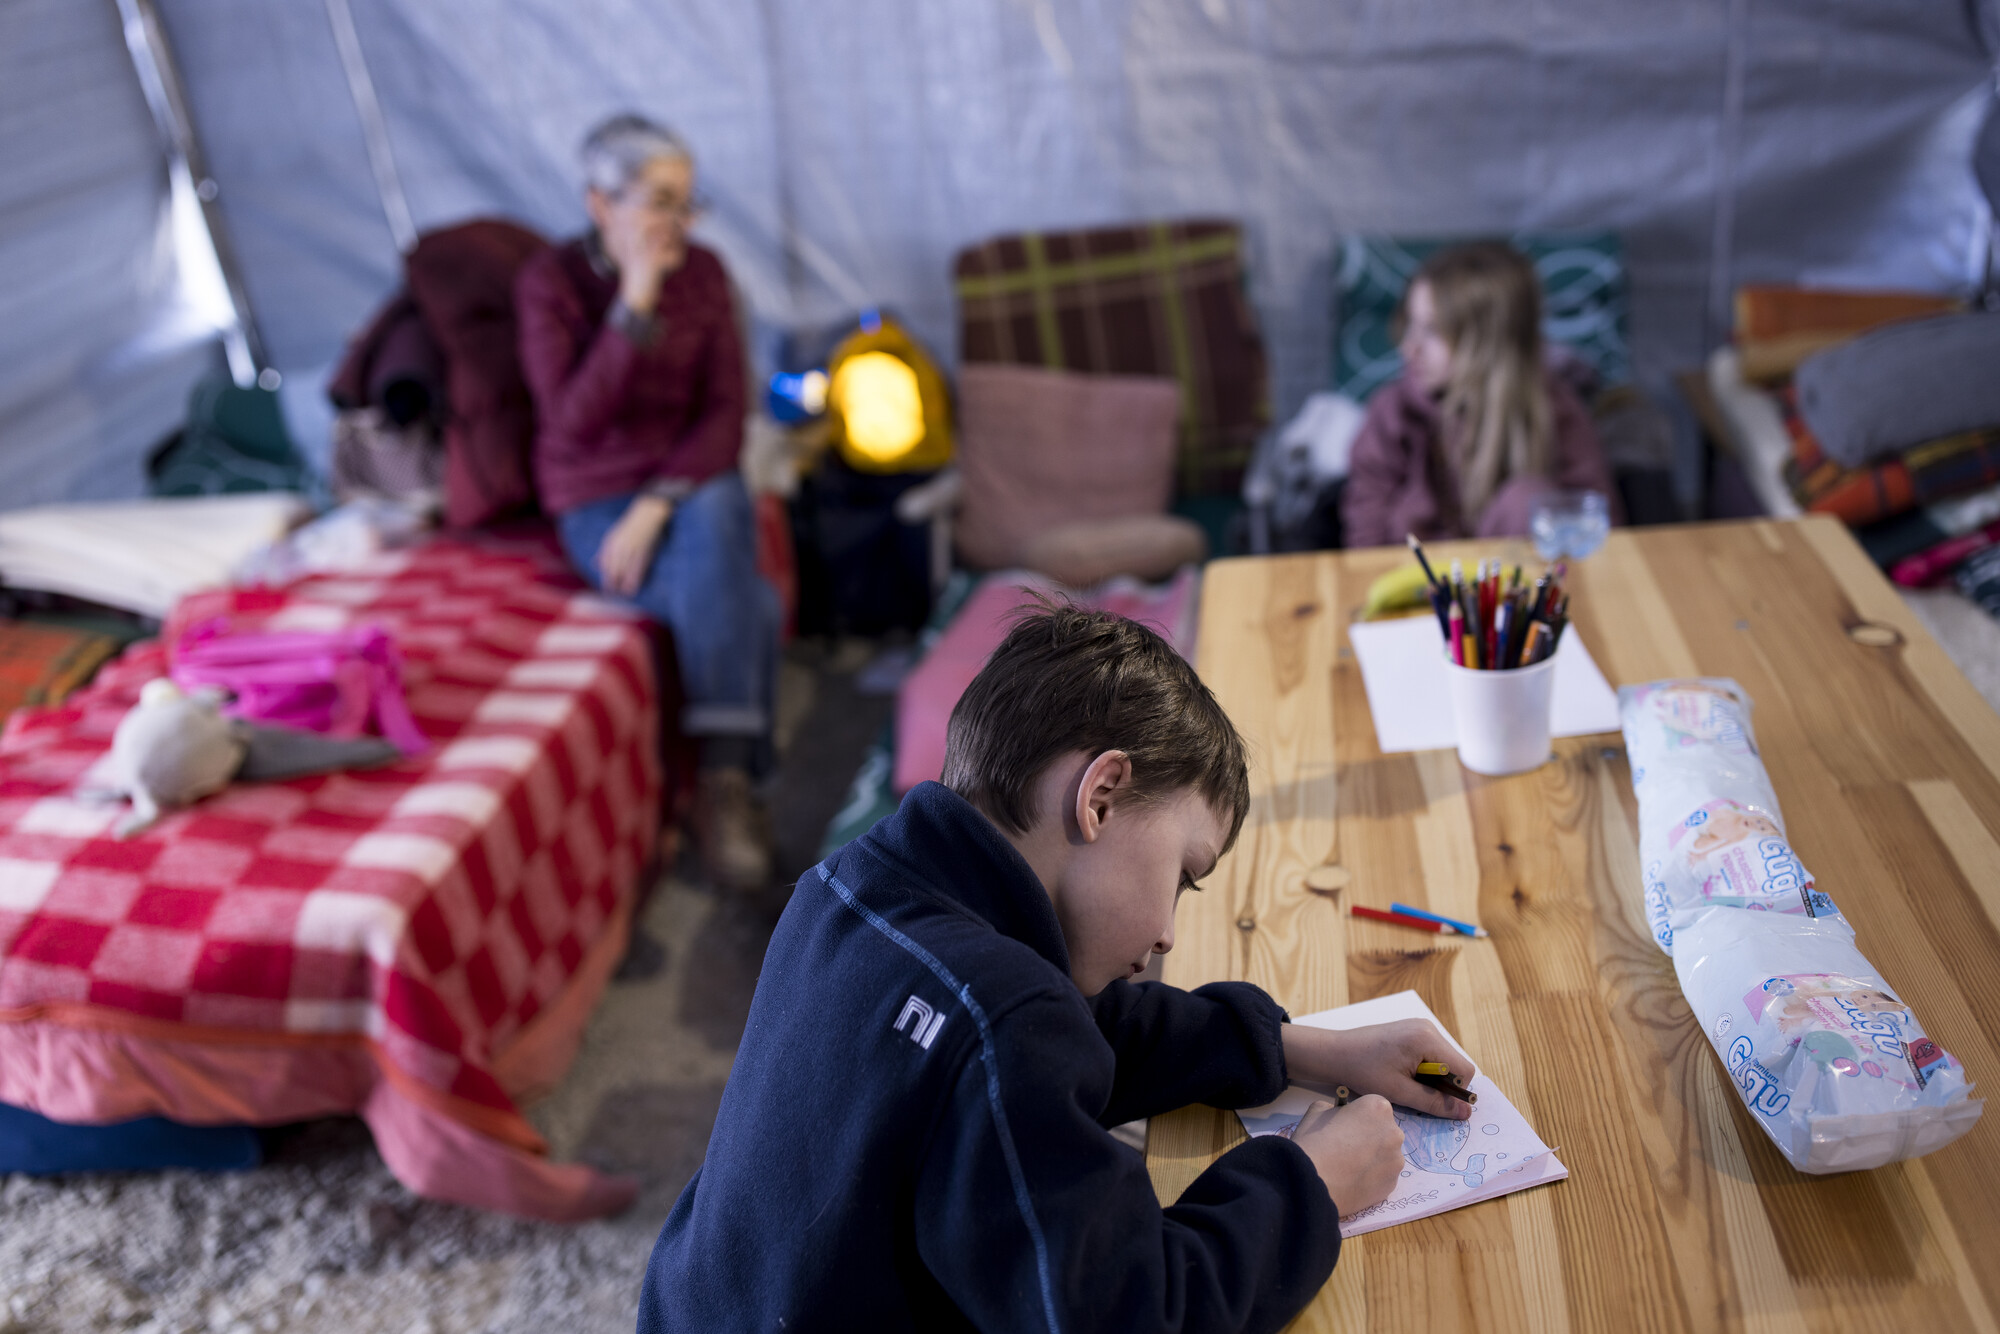 Ukraine refugees receives support at the Caritas tent